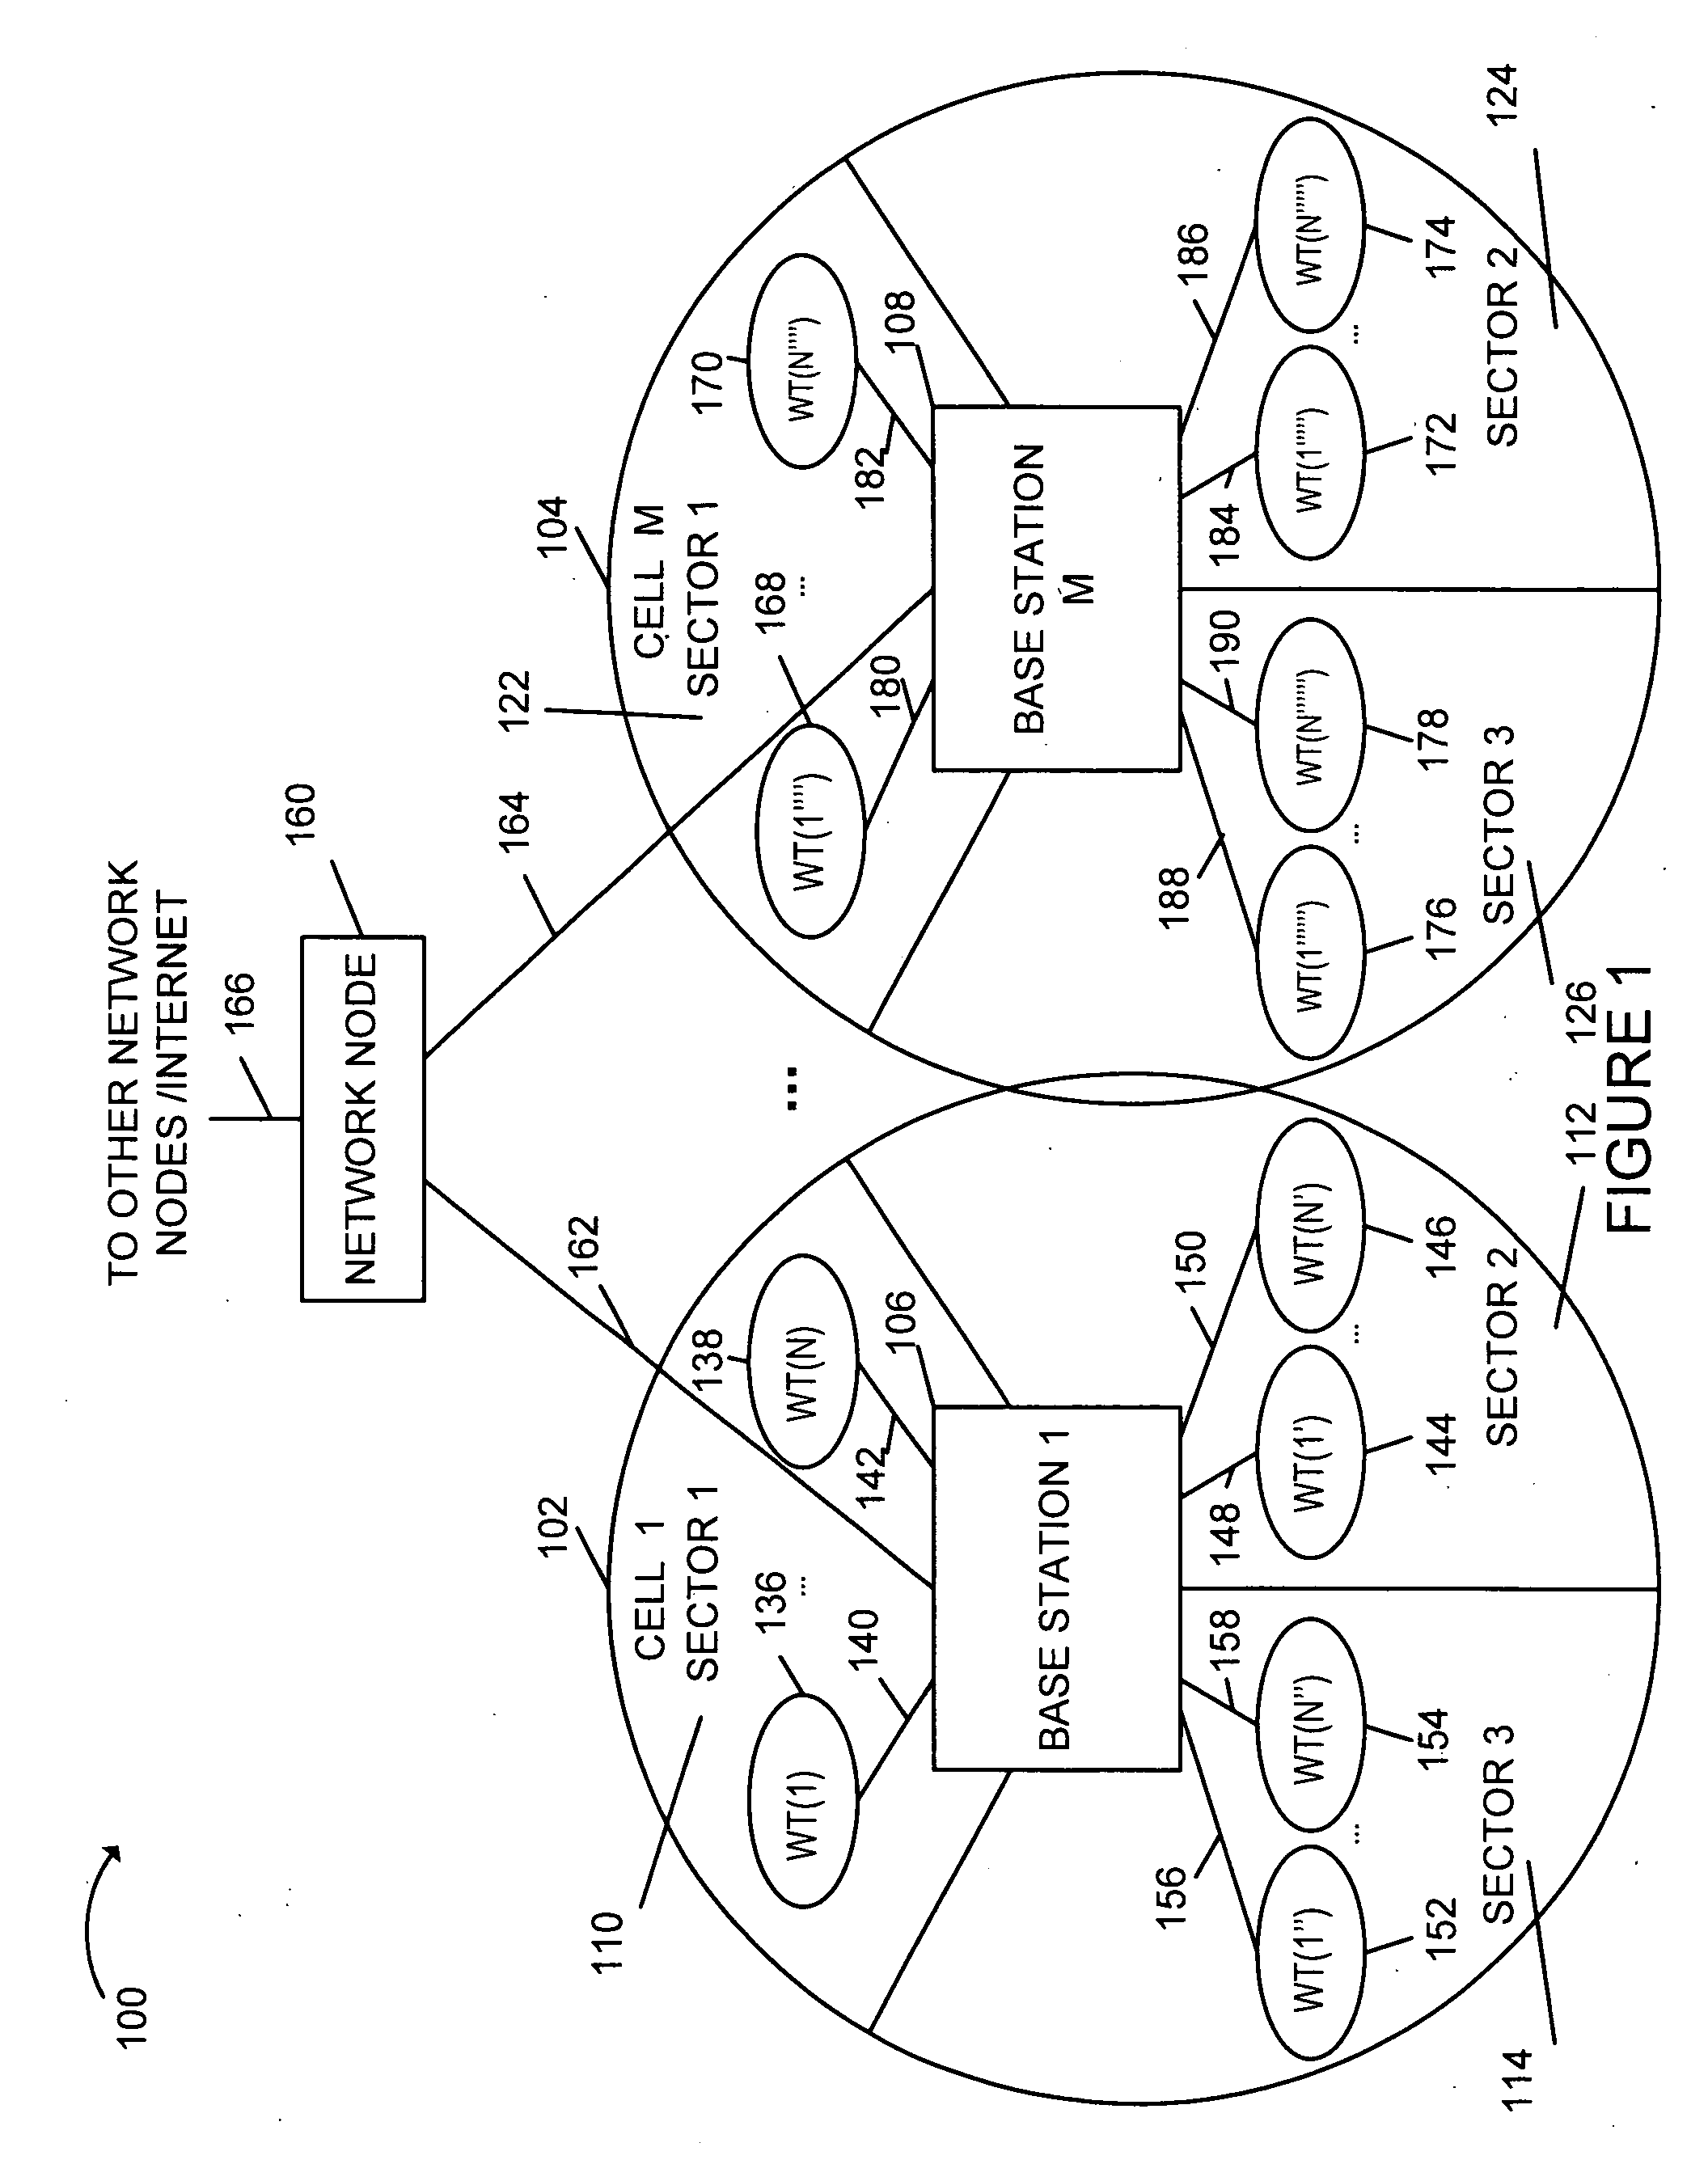 Methods and apparatus for generating, communicating, and/or using information relating to self-noise